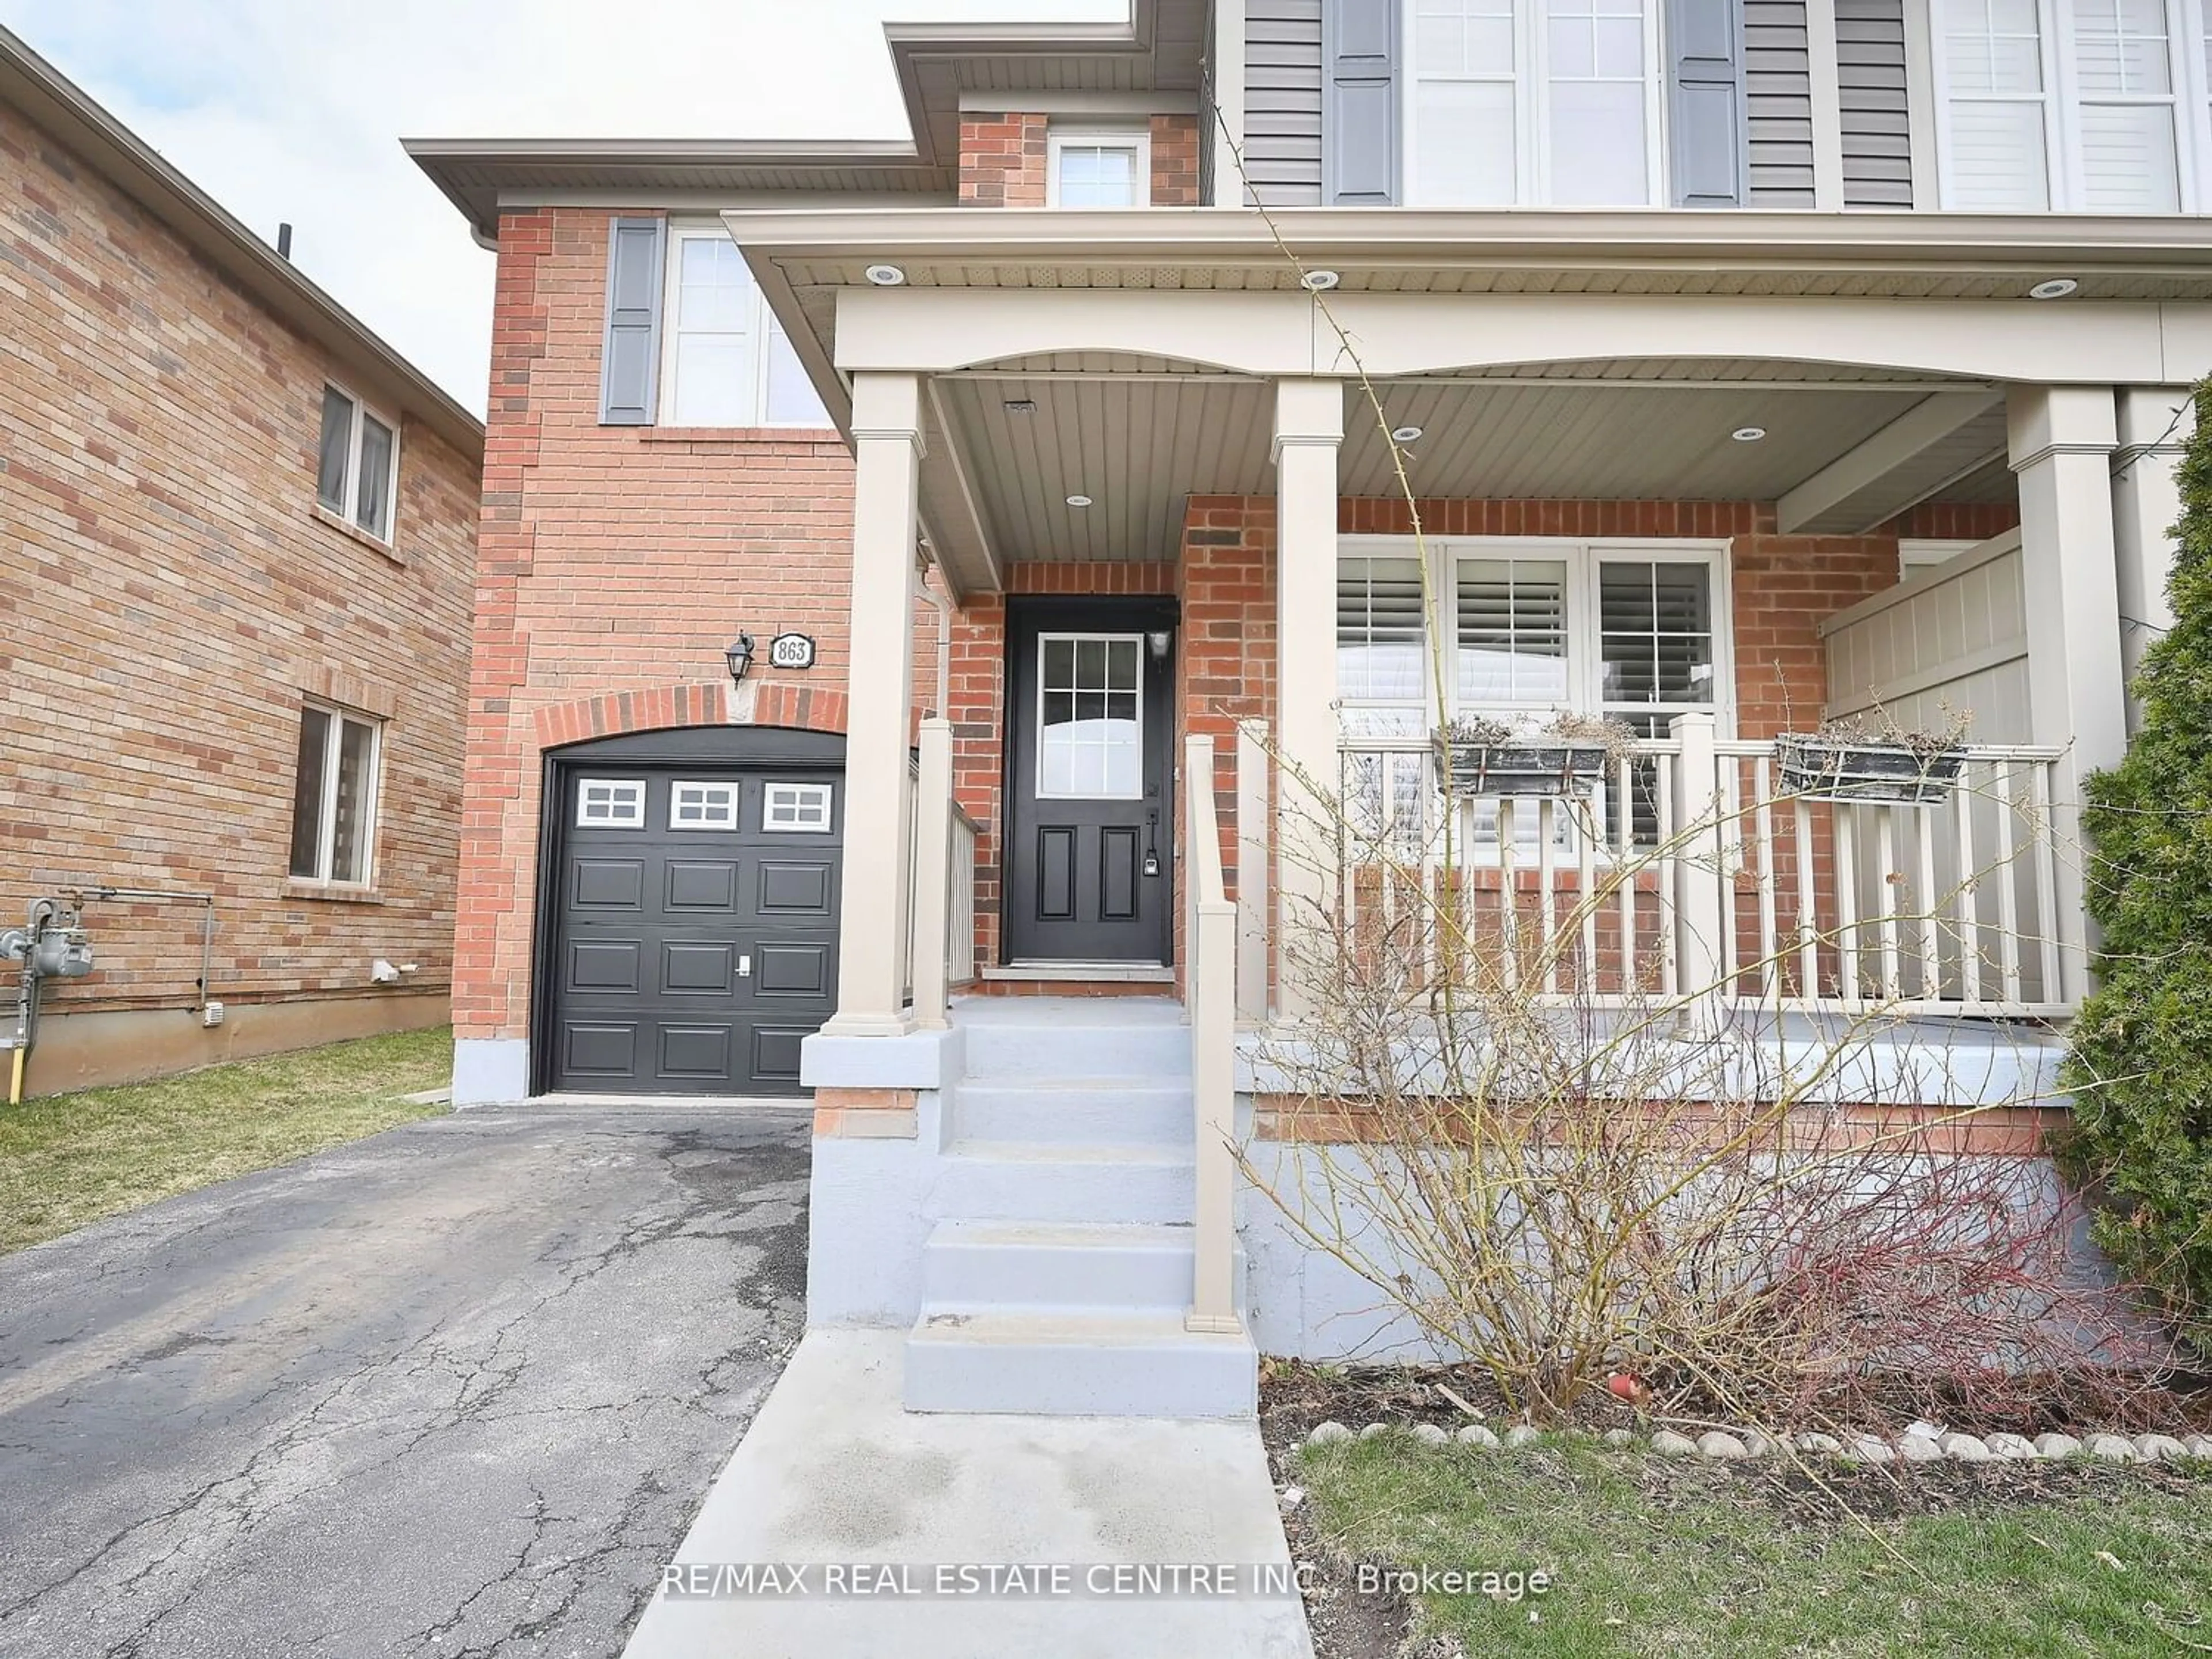 Home with brick exterior material for 863 Scott Blvd, Milton Ontario L9T 1N1